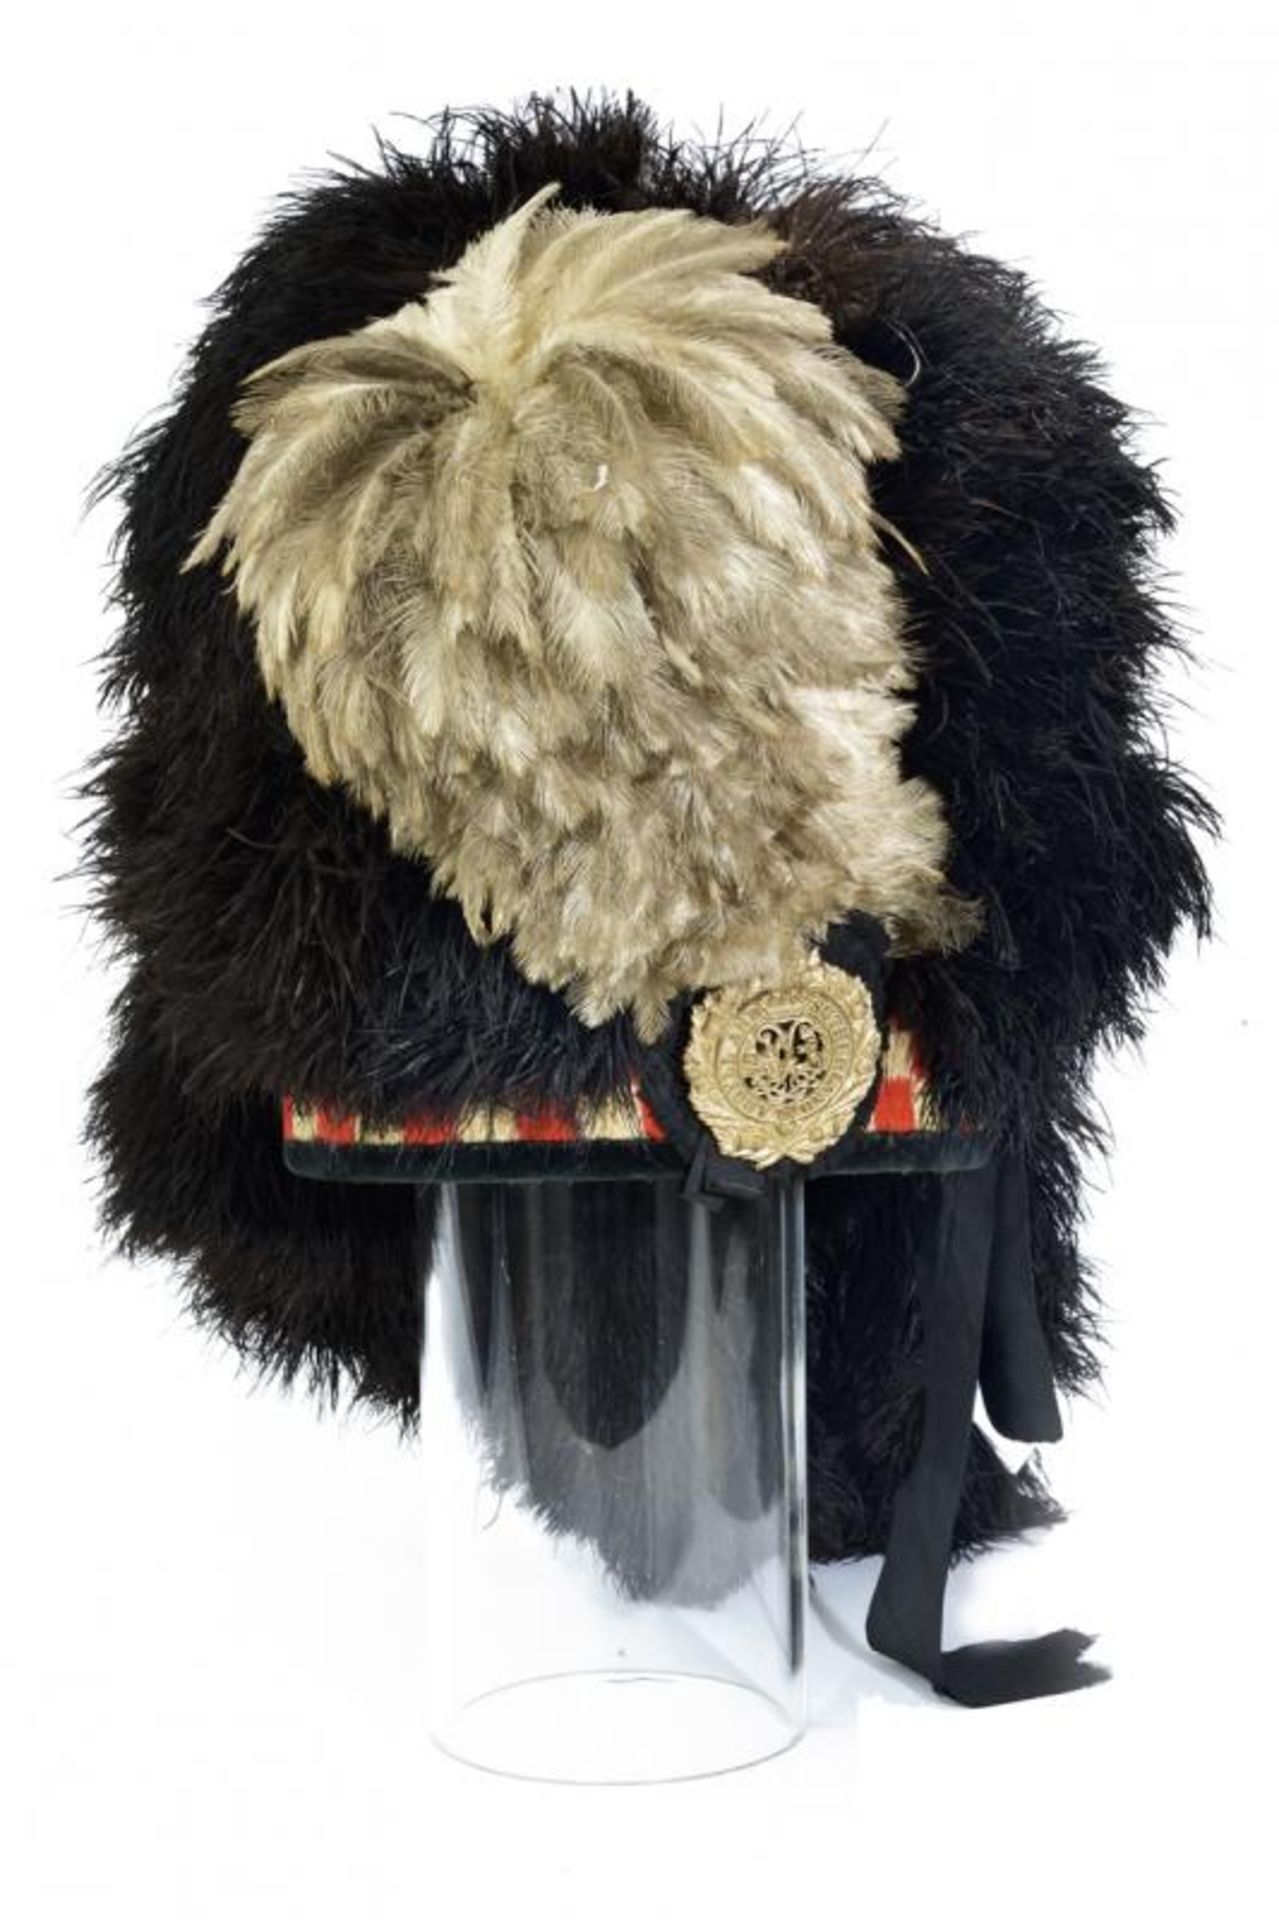 A feather bonnet of the Argyll & Sutherland Highlanders